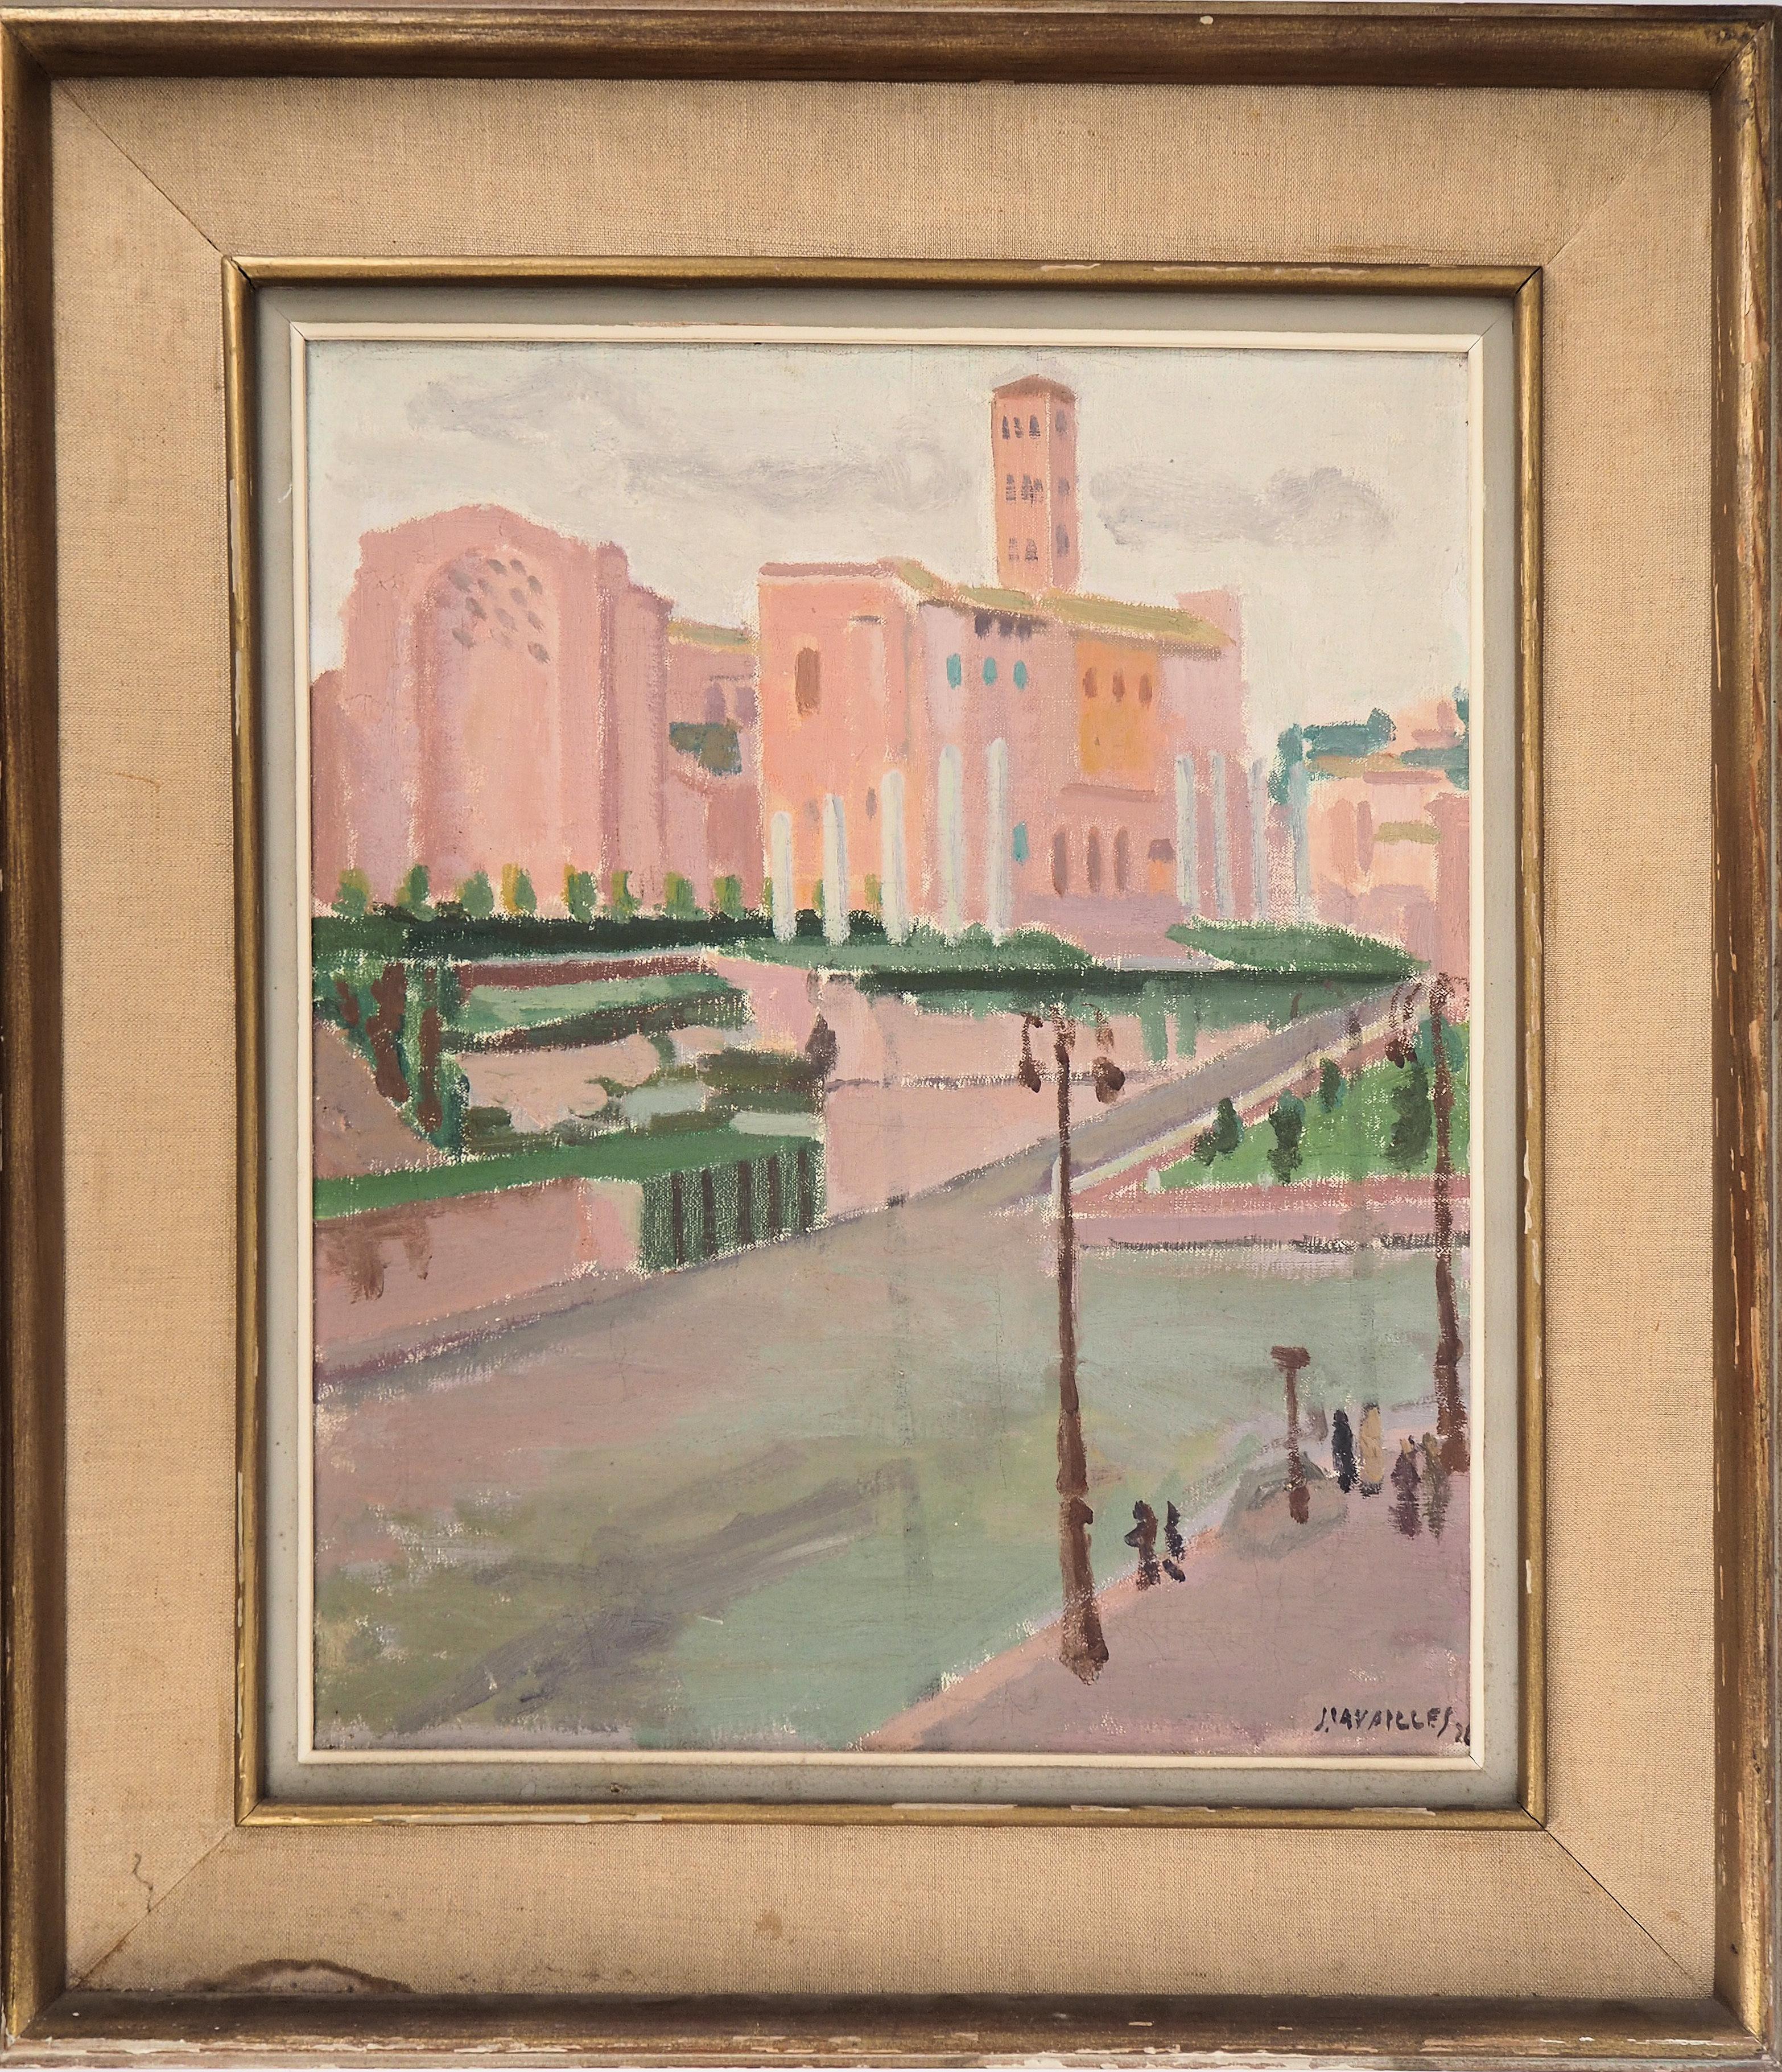 Rome, The Forum Seen From the Colosseum - Original Oil on canvas, Signed